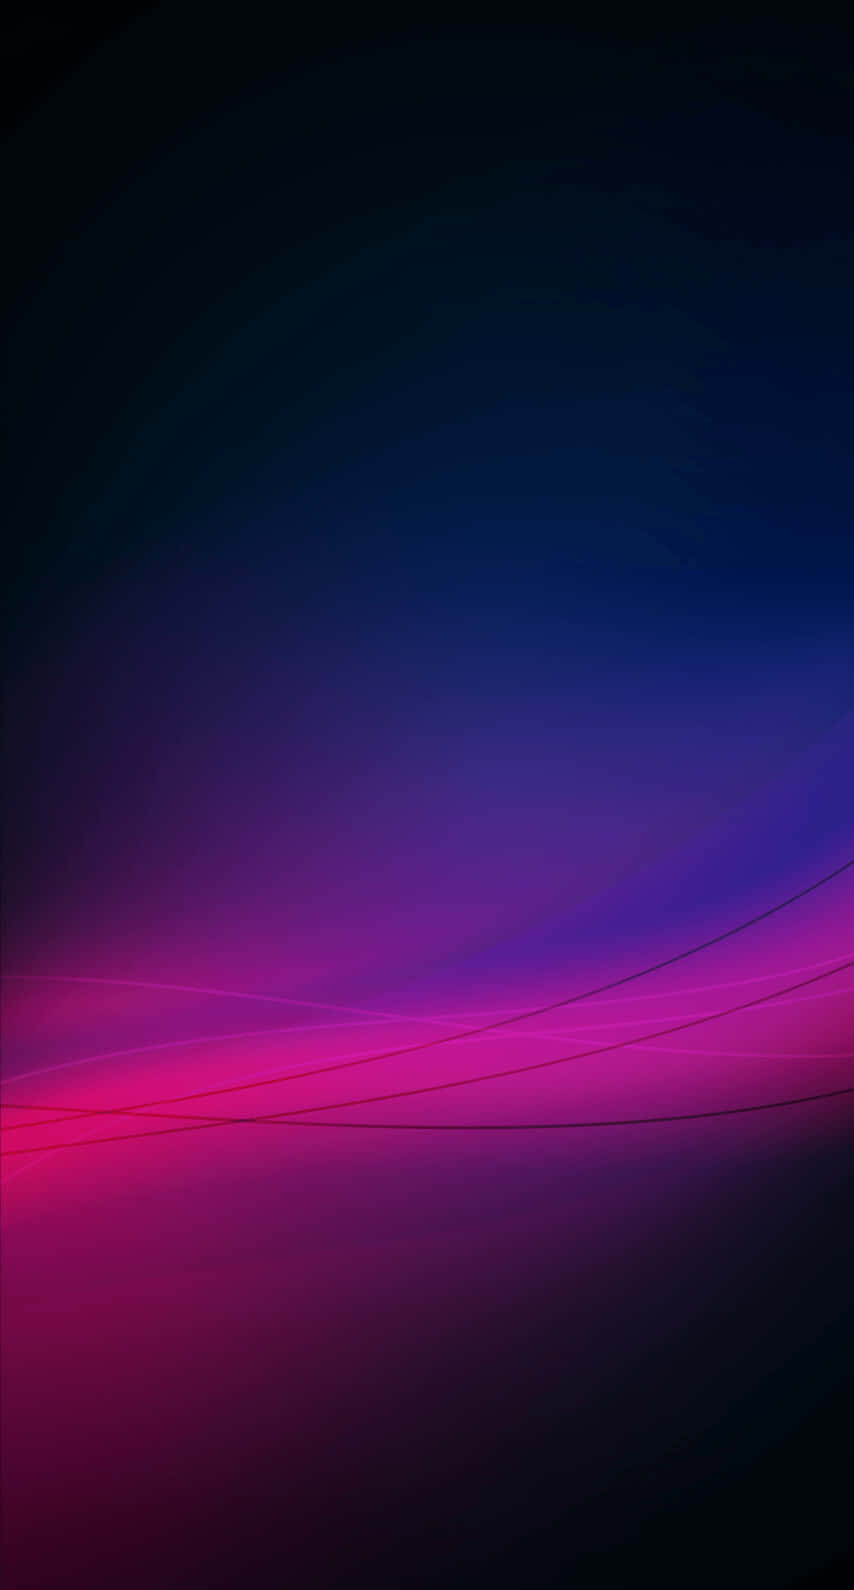 Get an elegant look with the iPhone Wallpaper